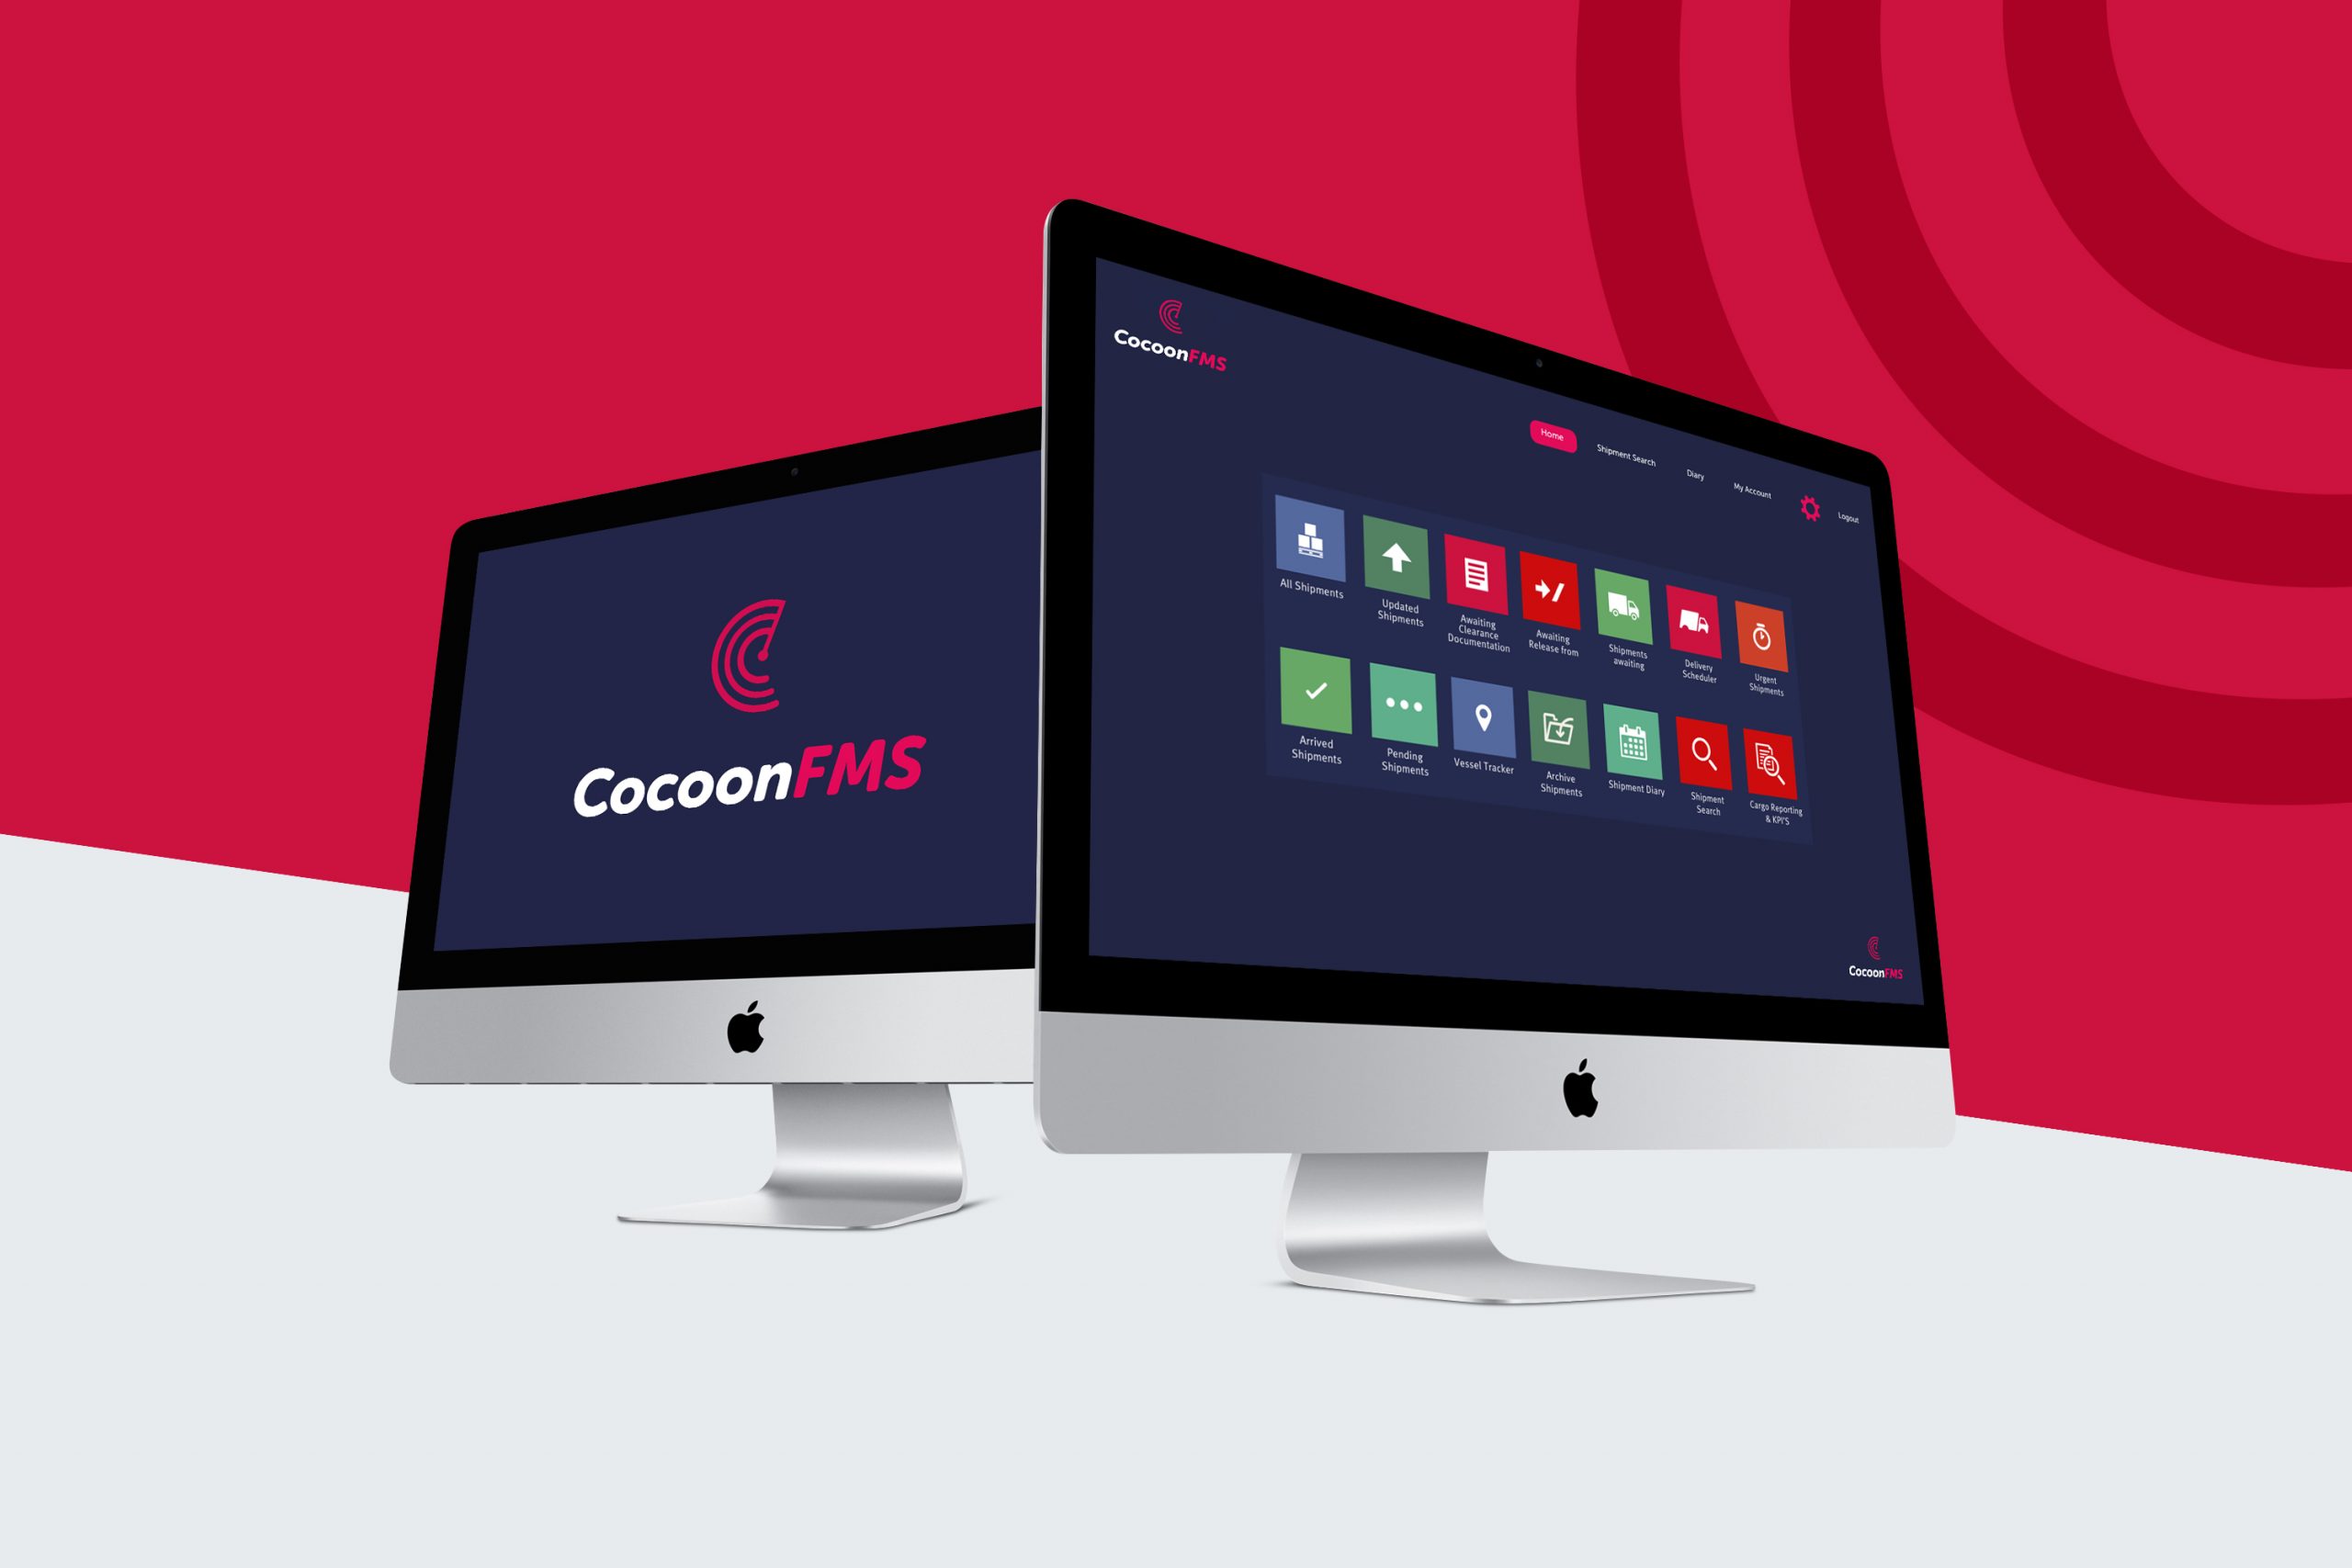 Cocoonfxmedia Ltd launches its new brand CocoonFMS